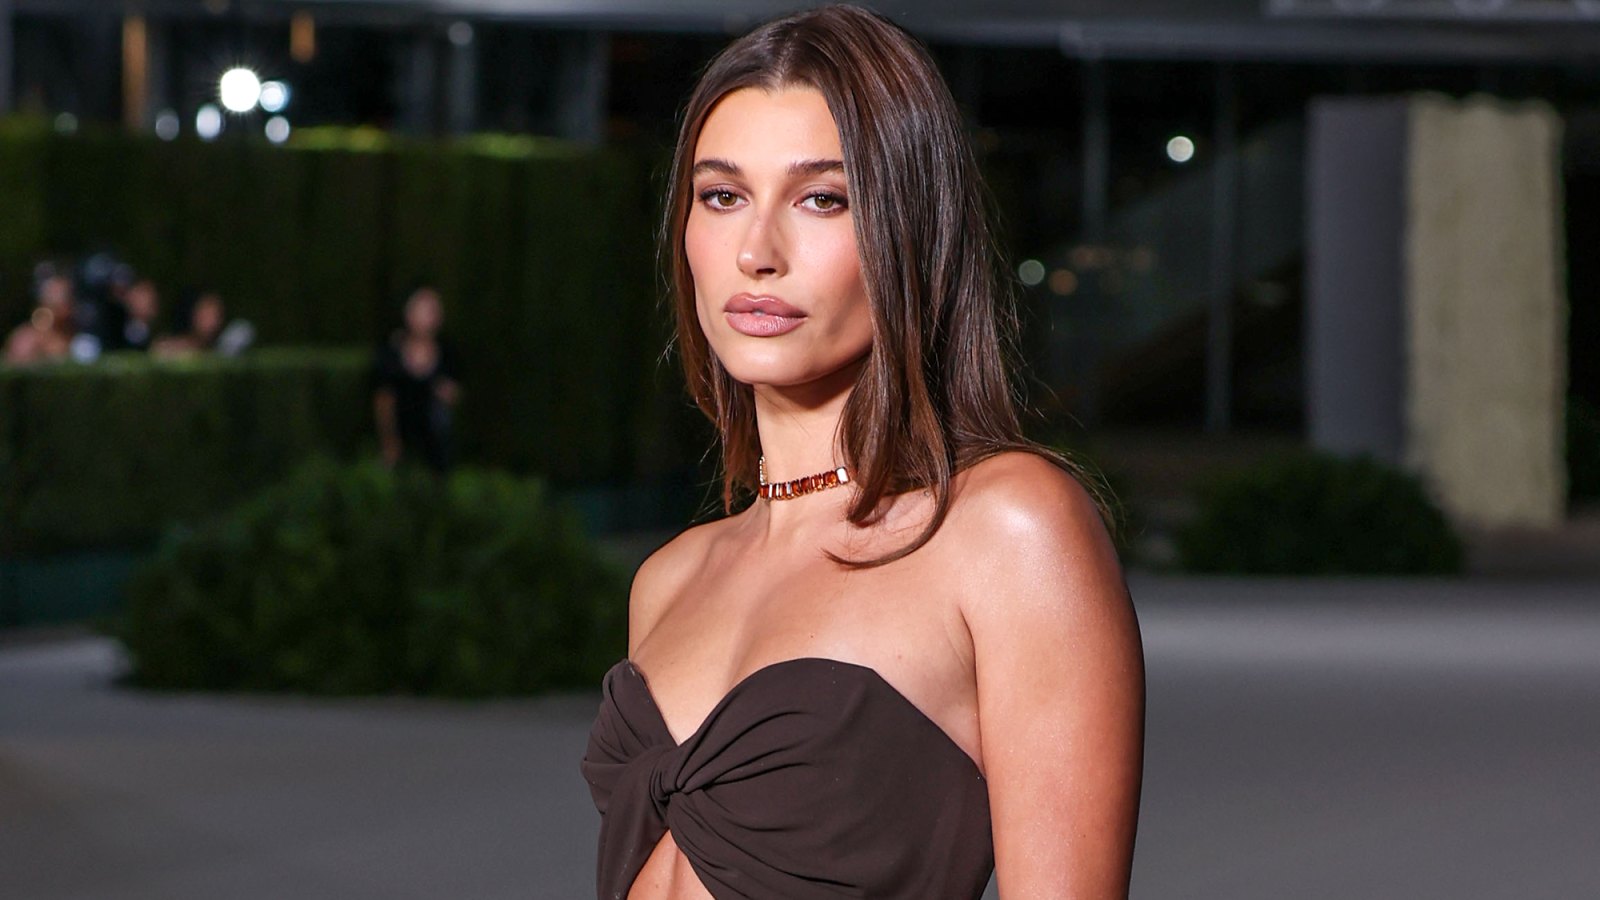 Hailey Bieber Marks 1 Year Since Suffering Mini-Stroke: It Was 'Such a Life-Changing Event'